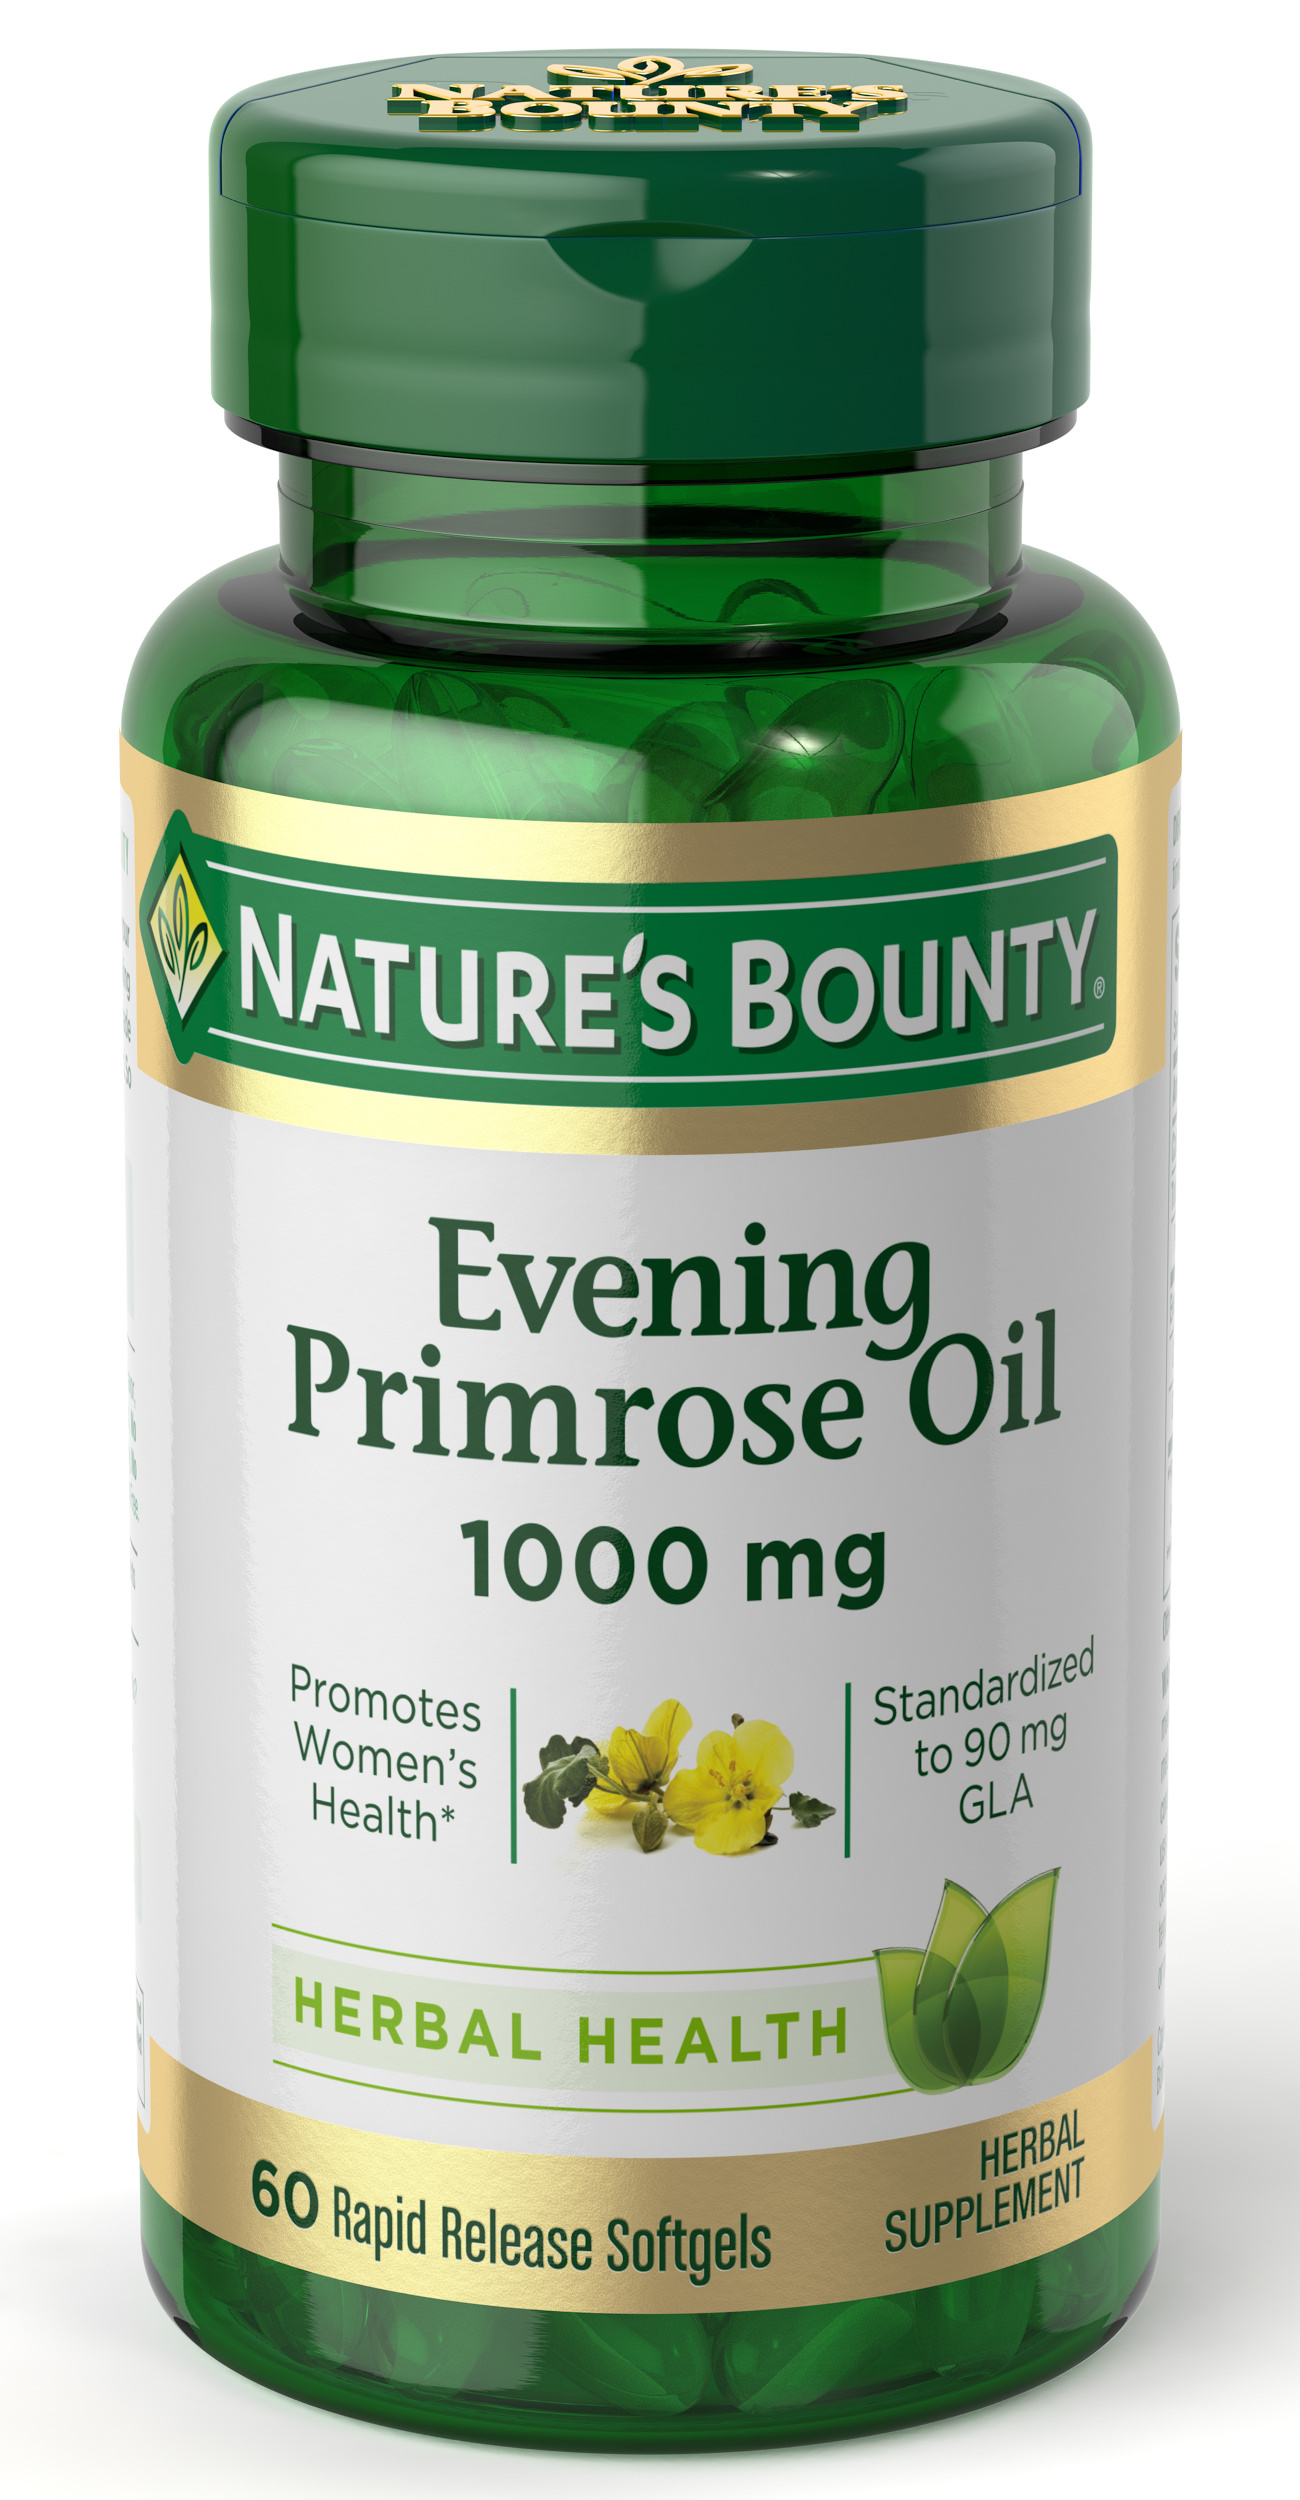 Nature's Bounty Evening Primrose Oil Softgels, Herbal Supplement, 1000 Mg, 60 Ct - image 1 of 8